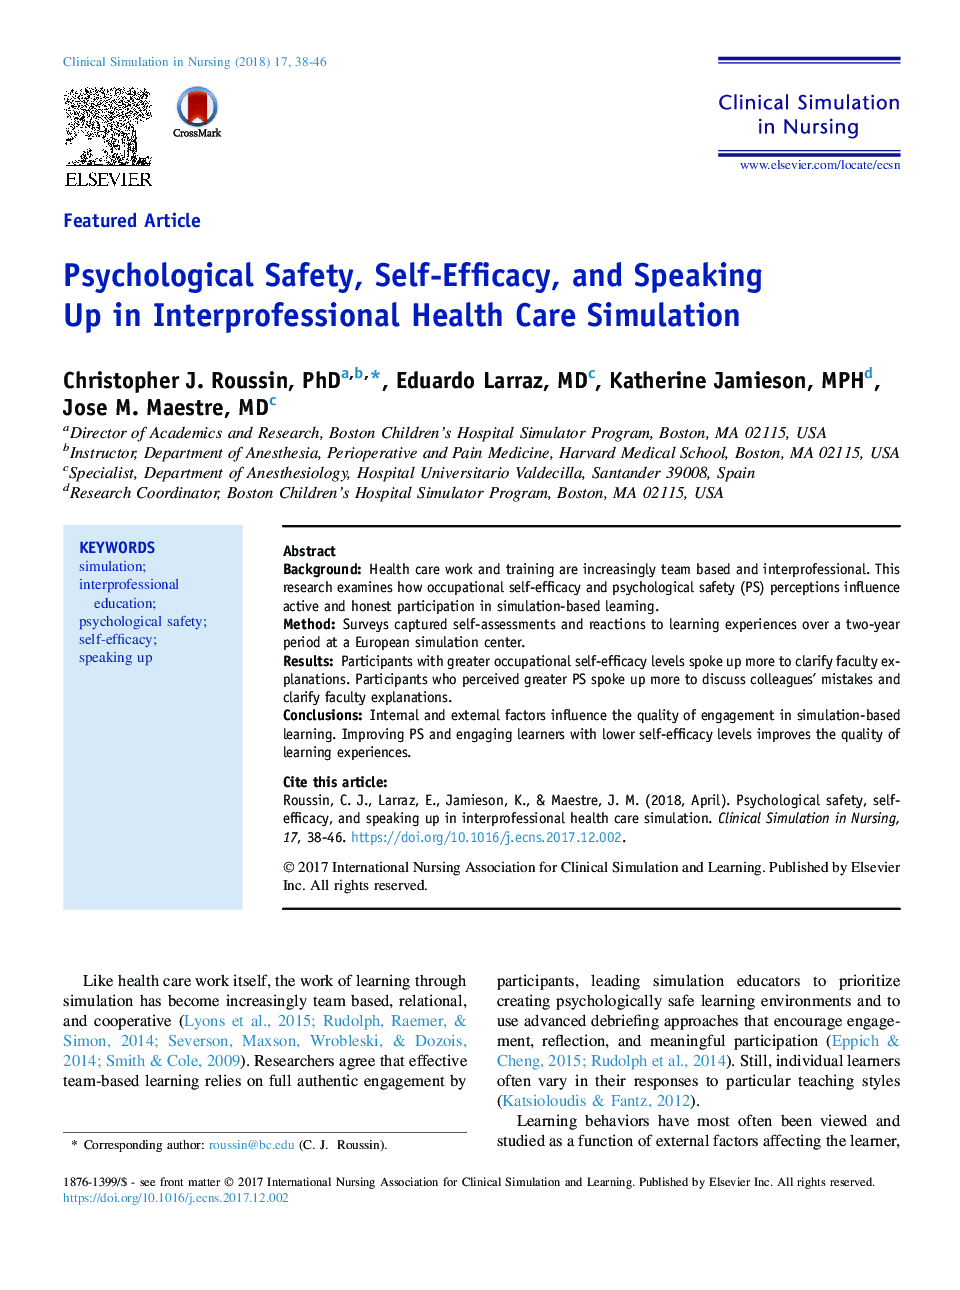 Psychological Safety, Self-Efficacy, and Speaking Up in Interprofessional Health Care Simulation